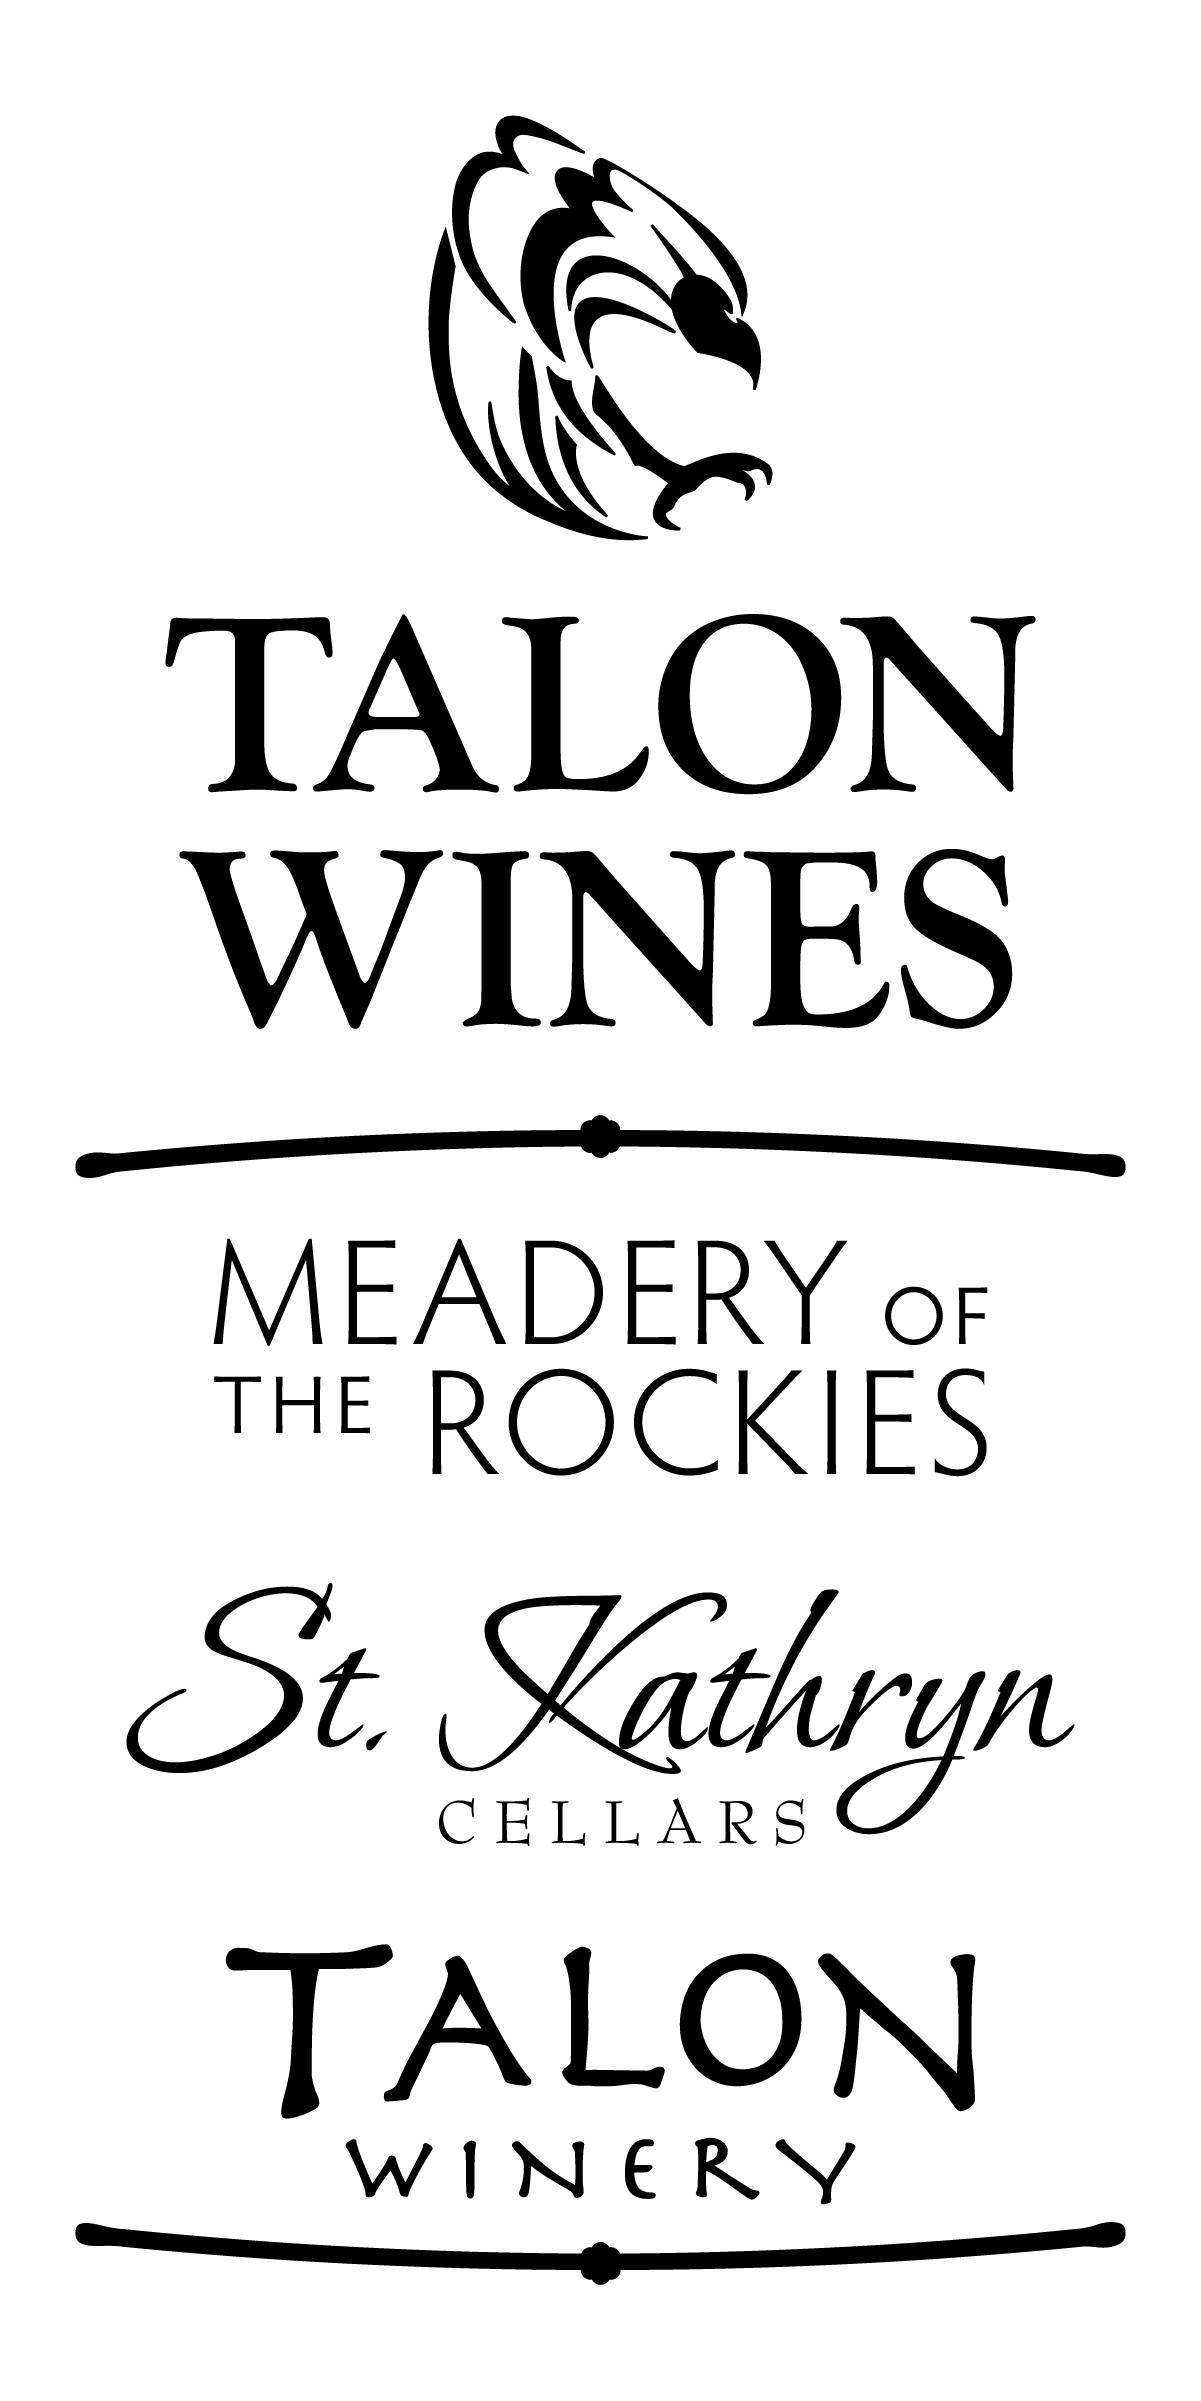 St. Kathryn Cellars Winery & Gift Shop